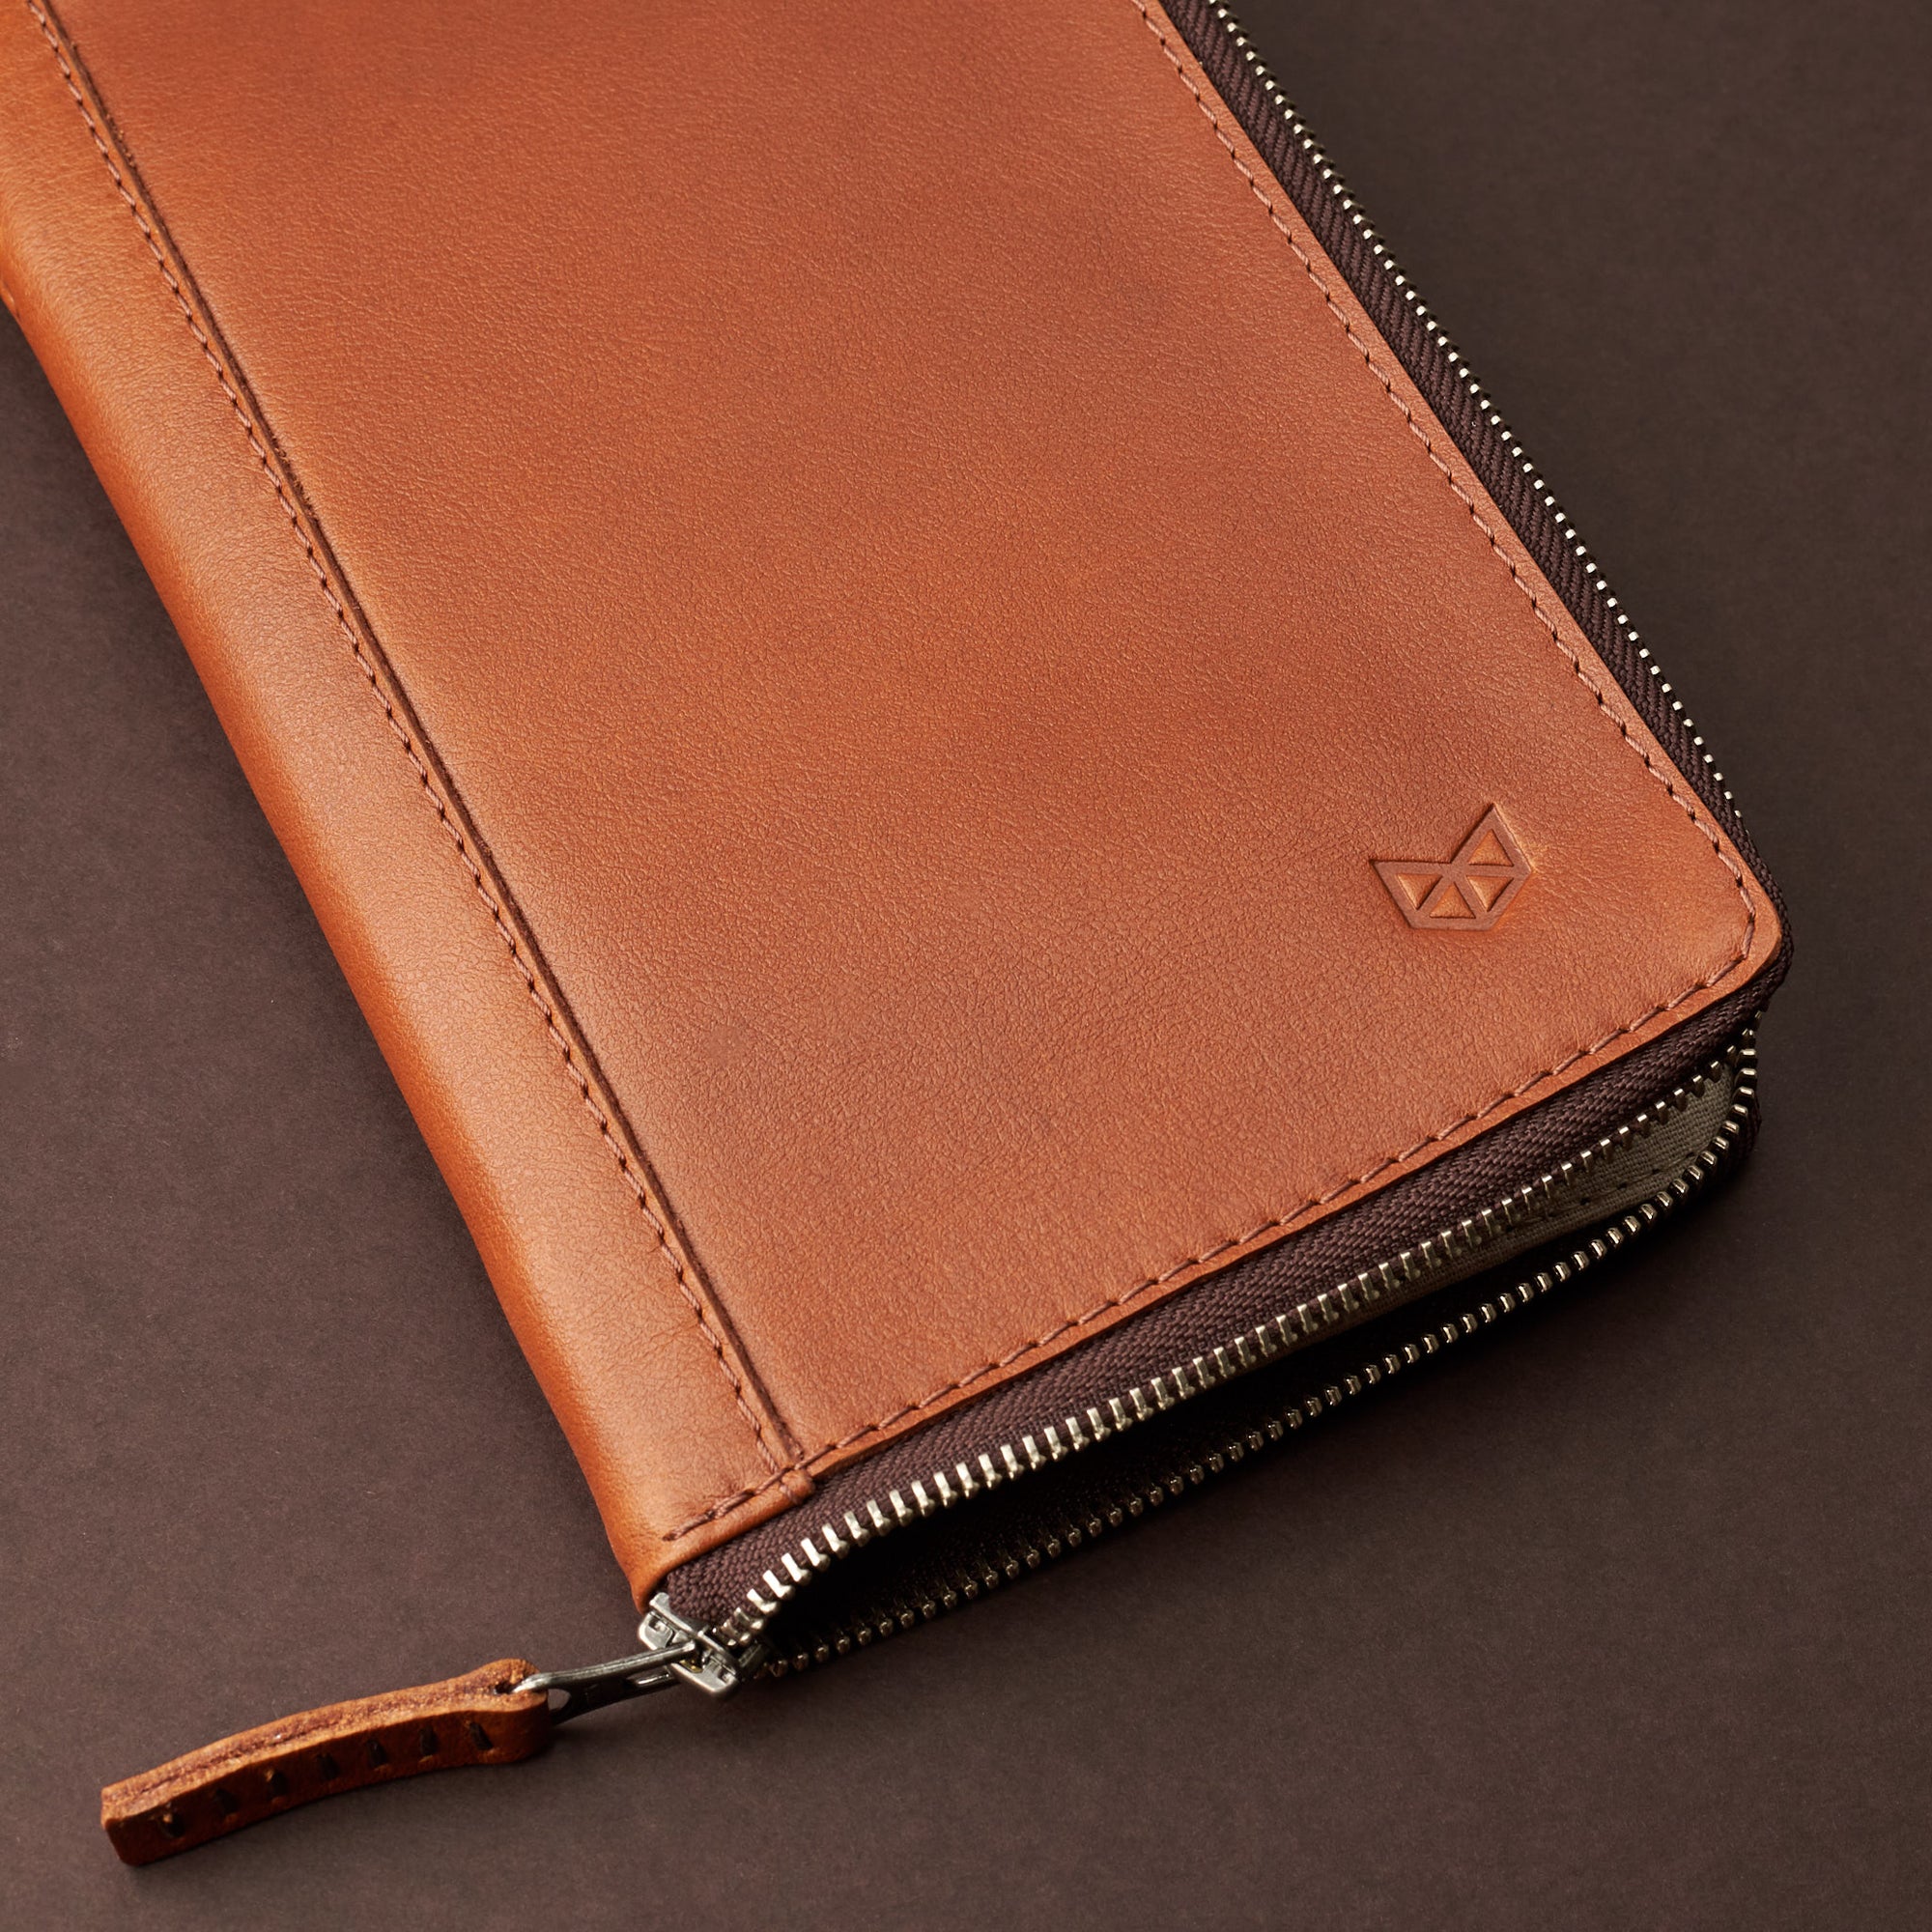 Passport holder's detail. Tan leather passport holder. Airport travel leather organizer accessories. Leather good craft by Capra Leather.